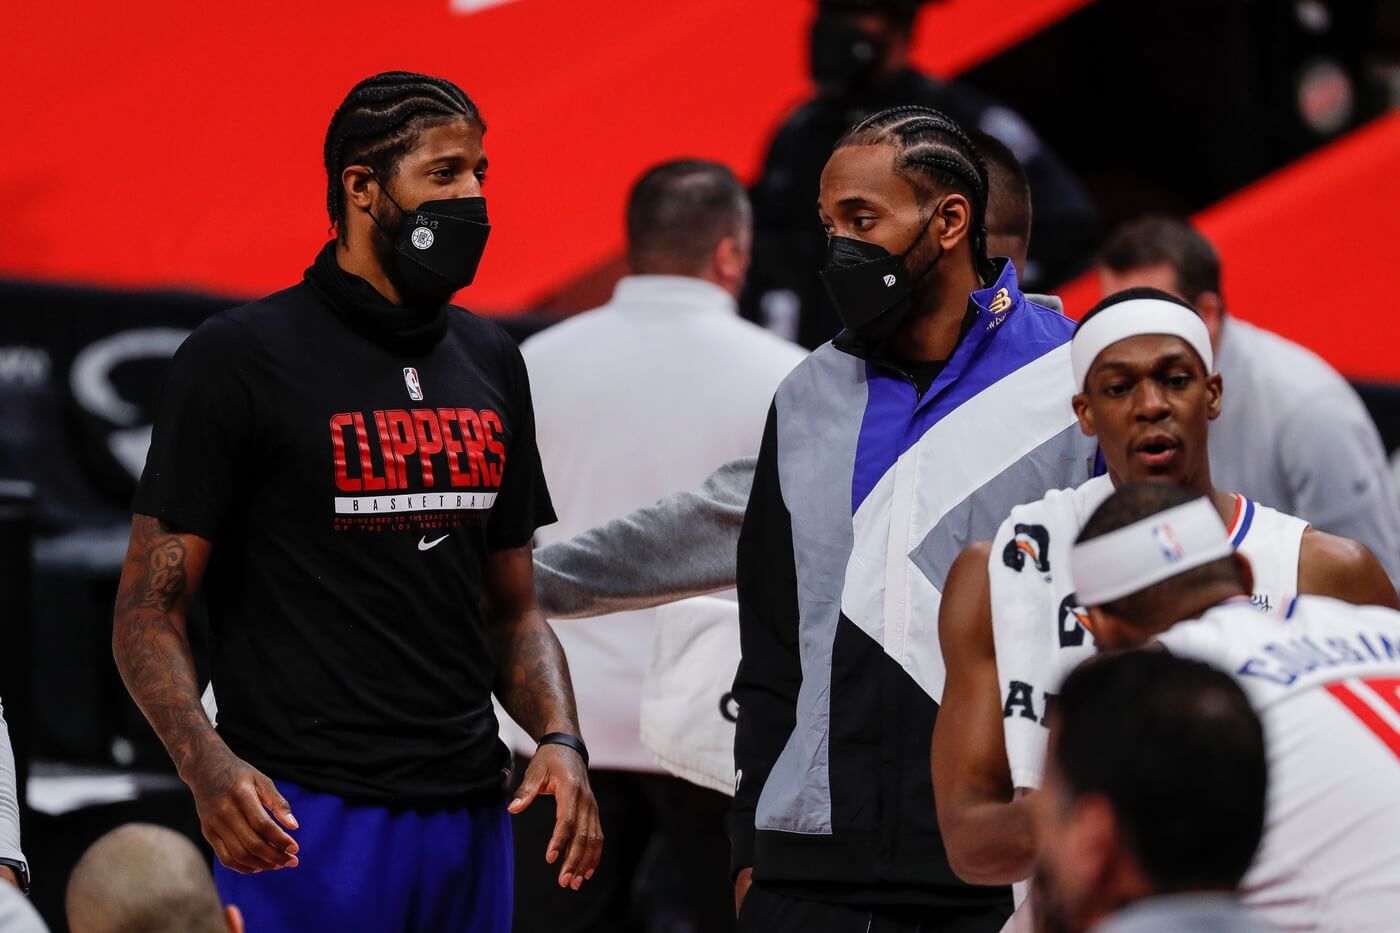 Clippers guard Paul George, left, talks to Kawhi Leonard at a timeout during the second half at the Little Caesars Arena on Wednesday, April 14, 2021.